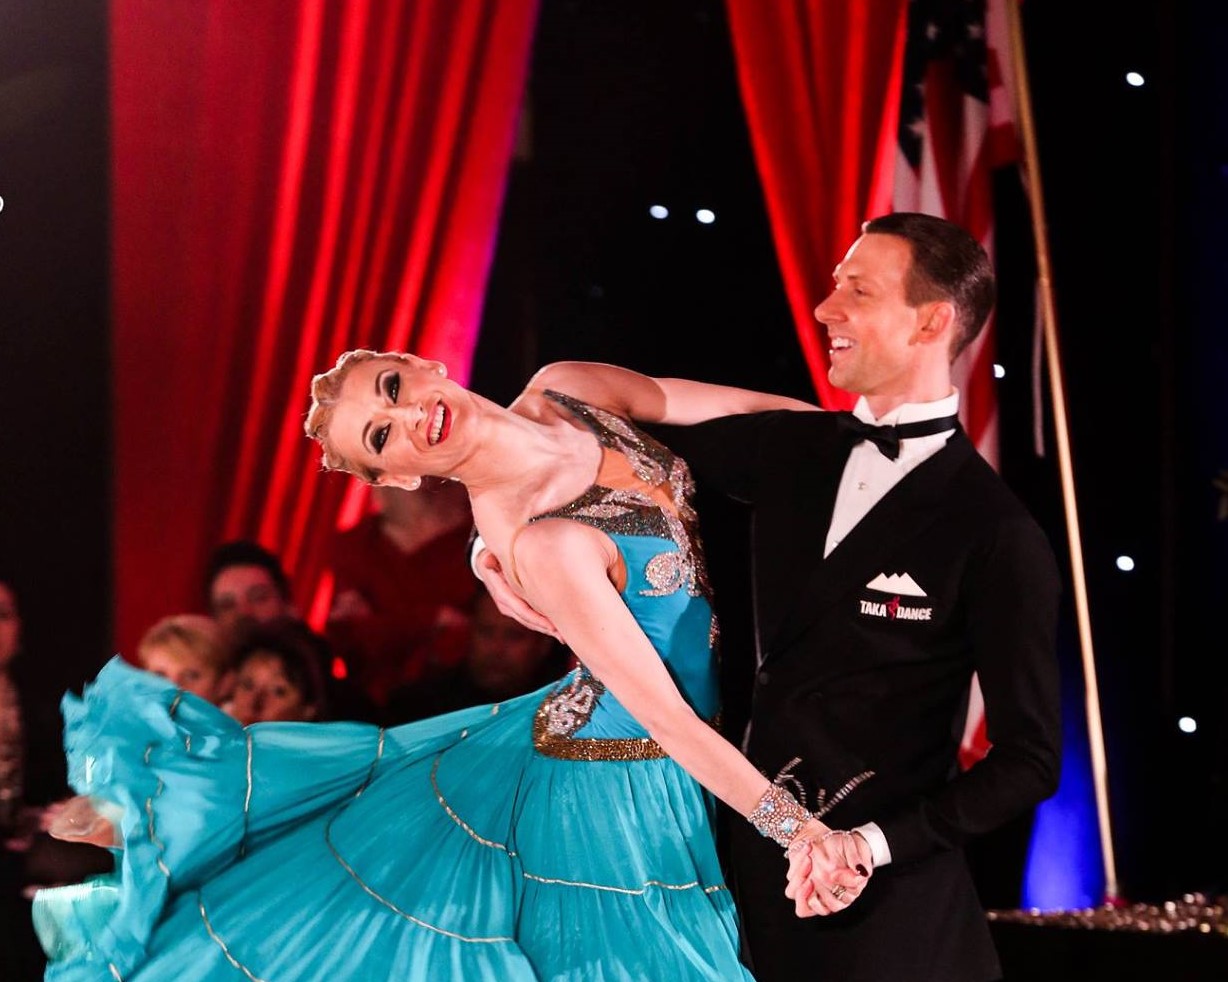 Image for the blog: The Top 55 Ballroom Dance Competitions in the World